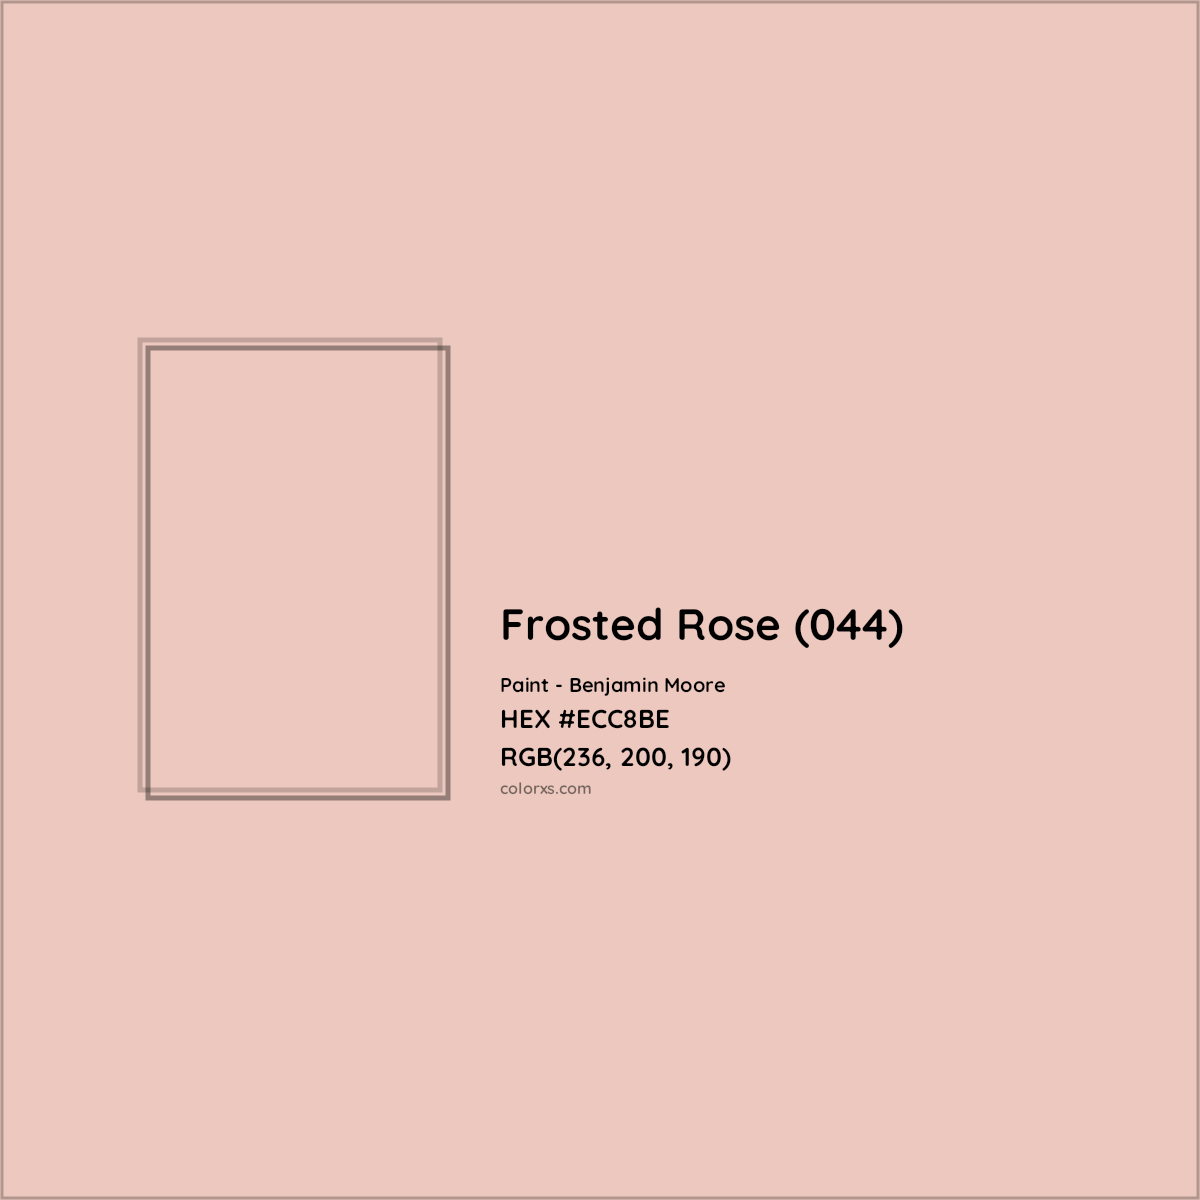 HEX #ECC8BE Frosted Rose (044) Paint Benjamin Moore - Color Code